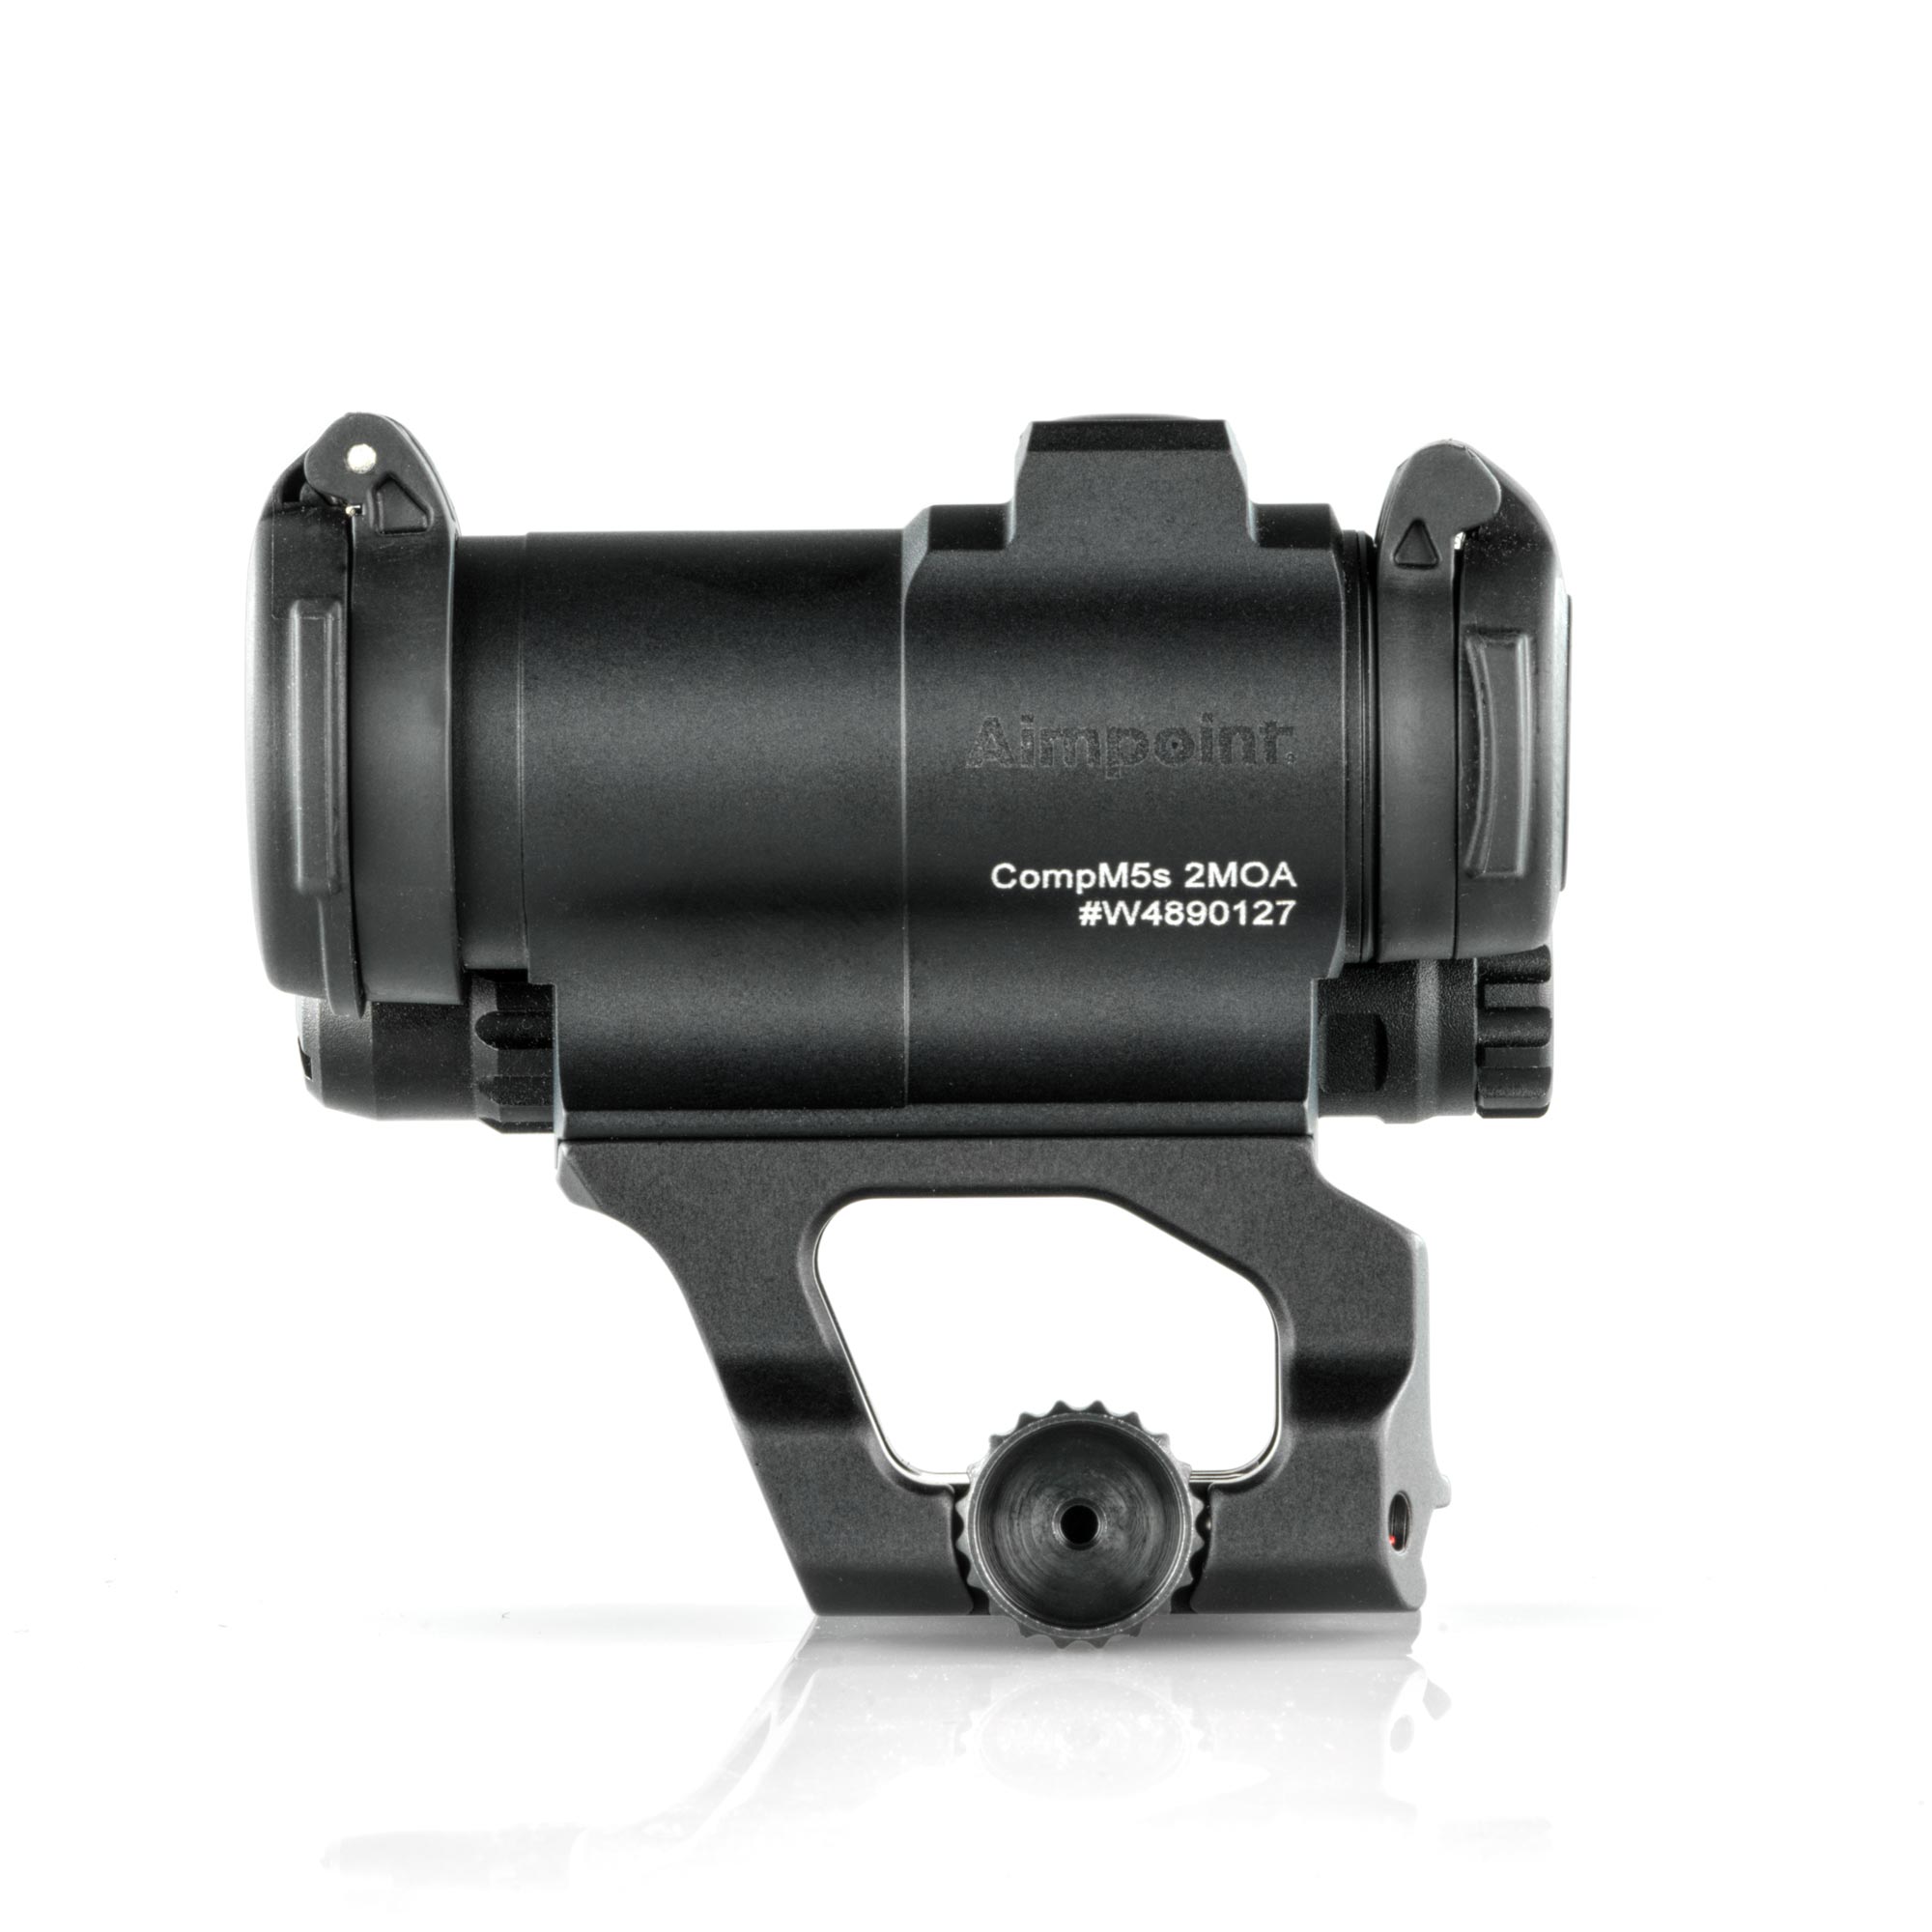 Aimpoint Comp M5B & Comp M5S Mount | 1.93 Aimpoint Mount